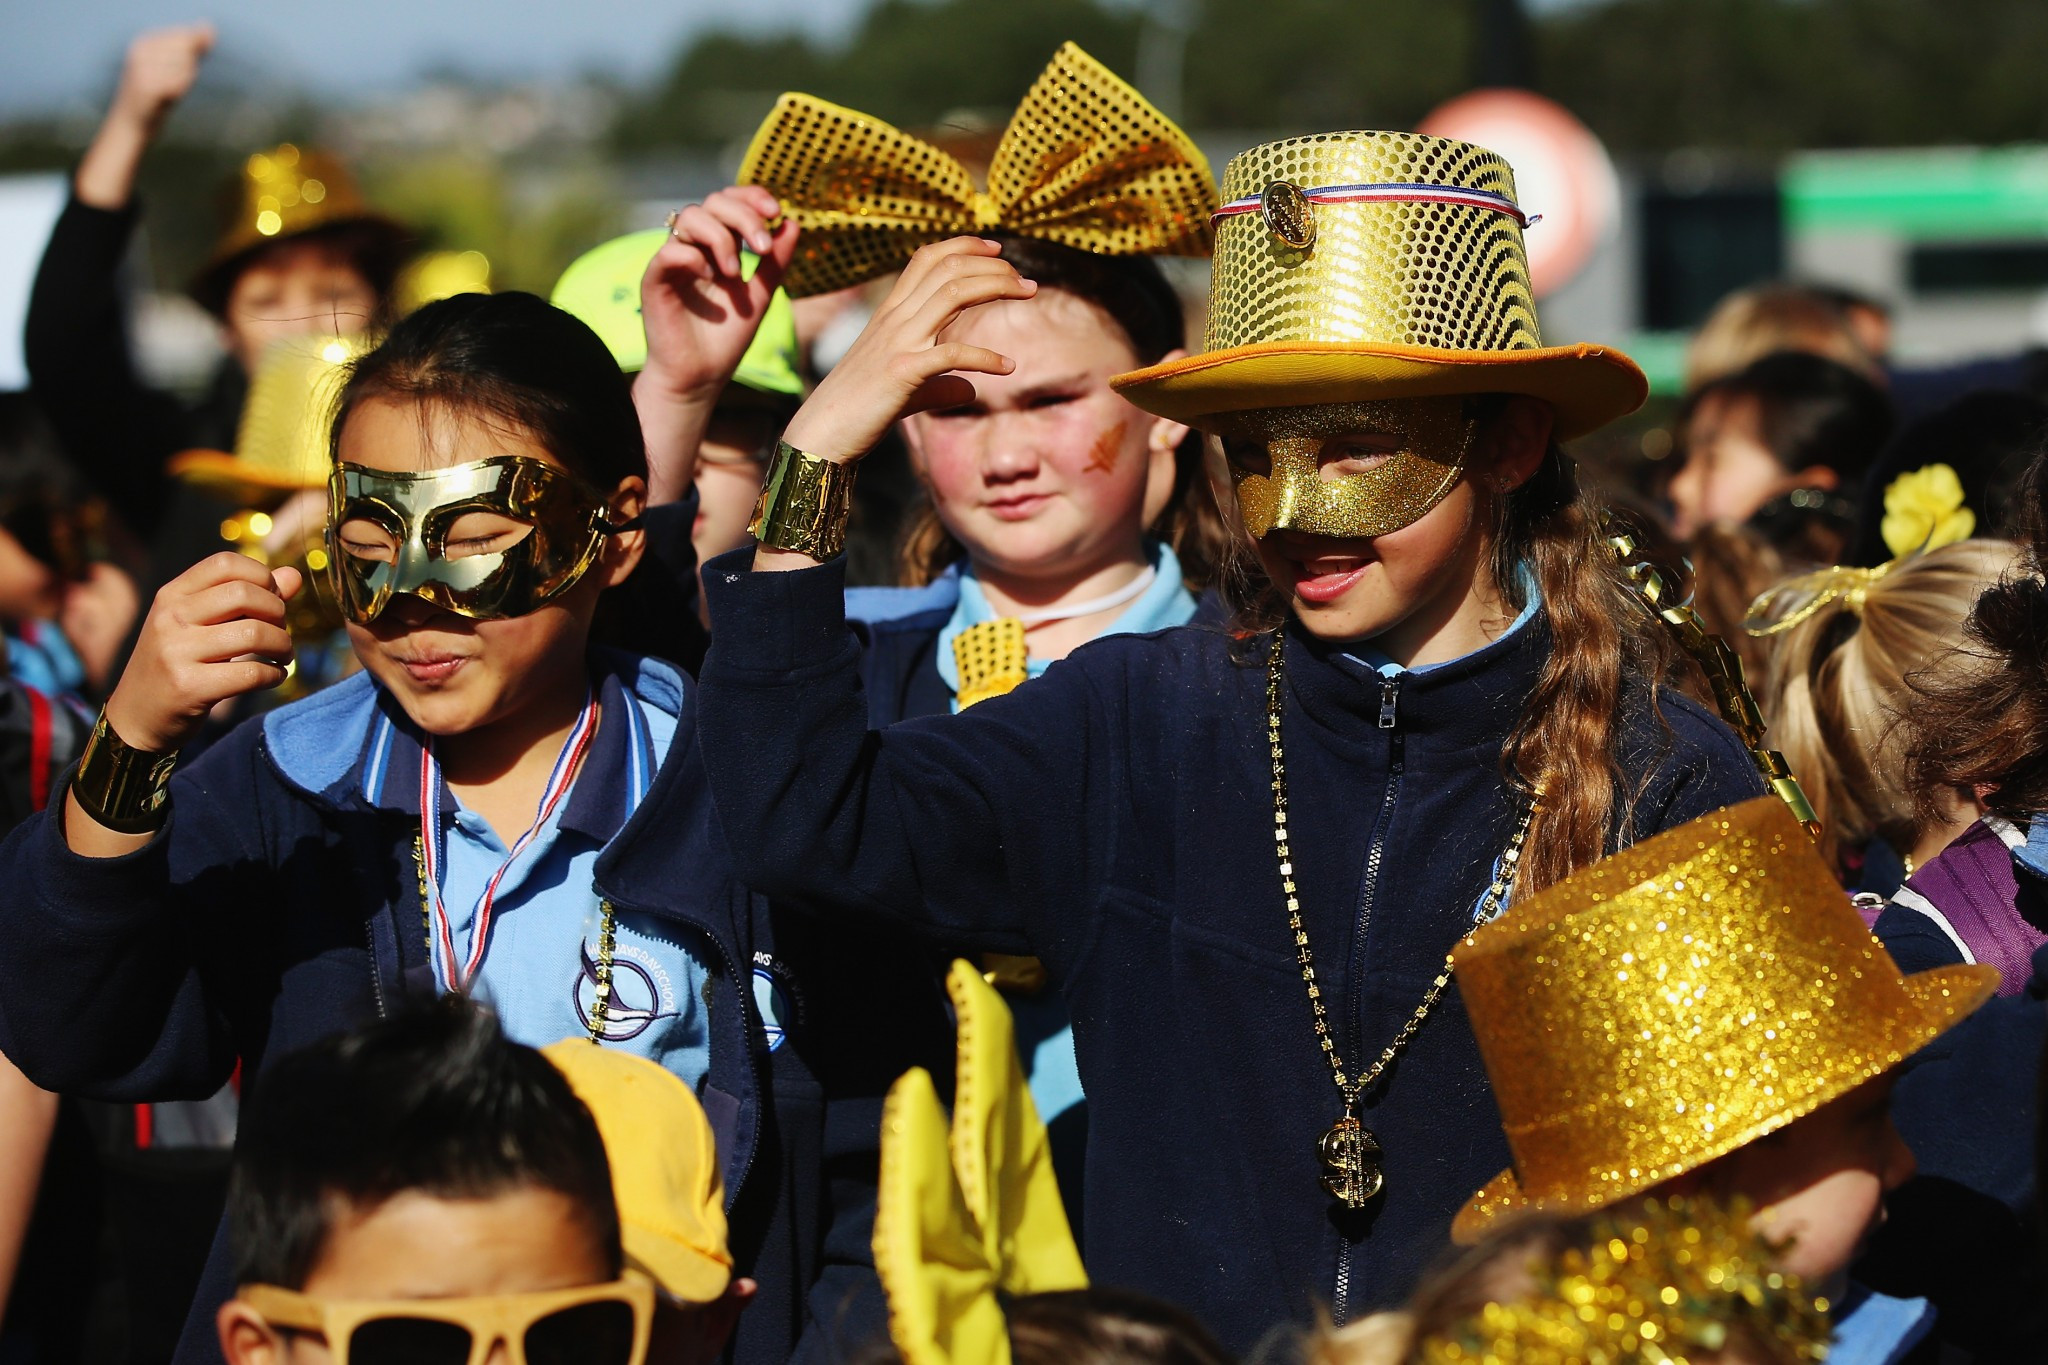 People dressed up for the "Spirit of Gold" mufti day to help raise funds to send New Zealand athletes to Pyeongchang 2018 ©PNZ